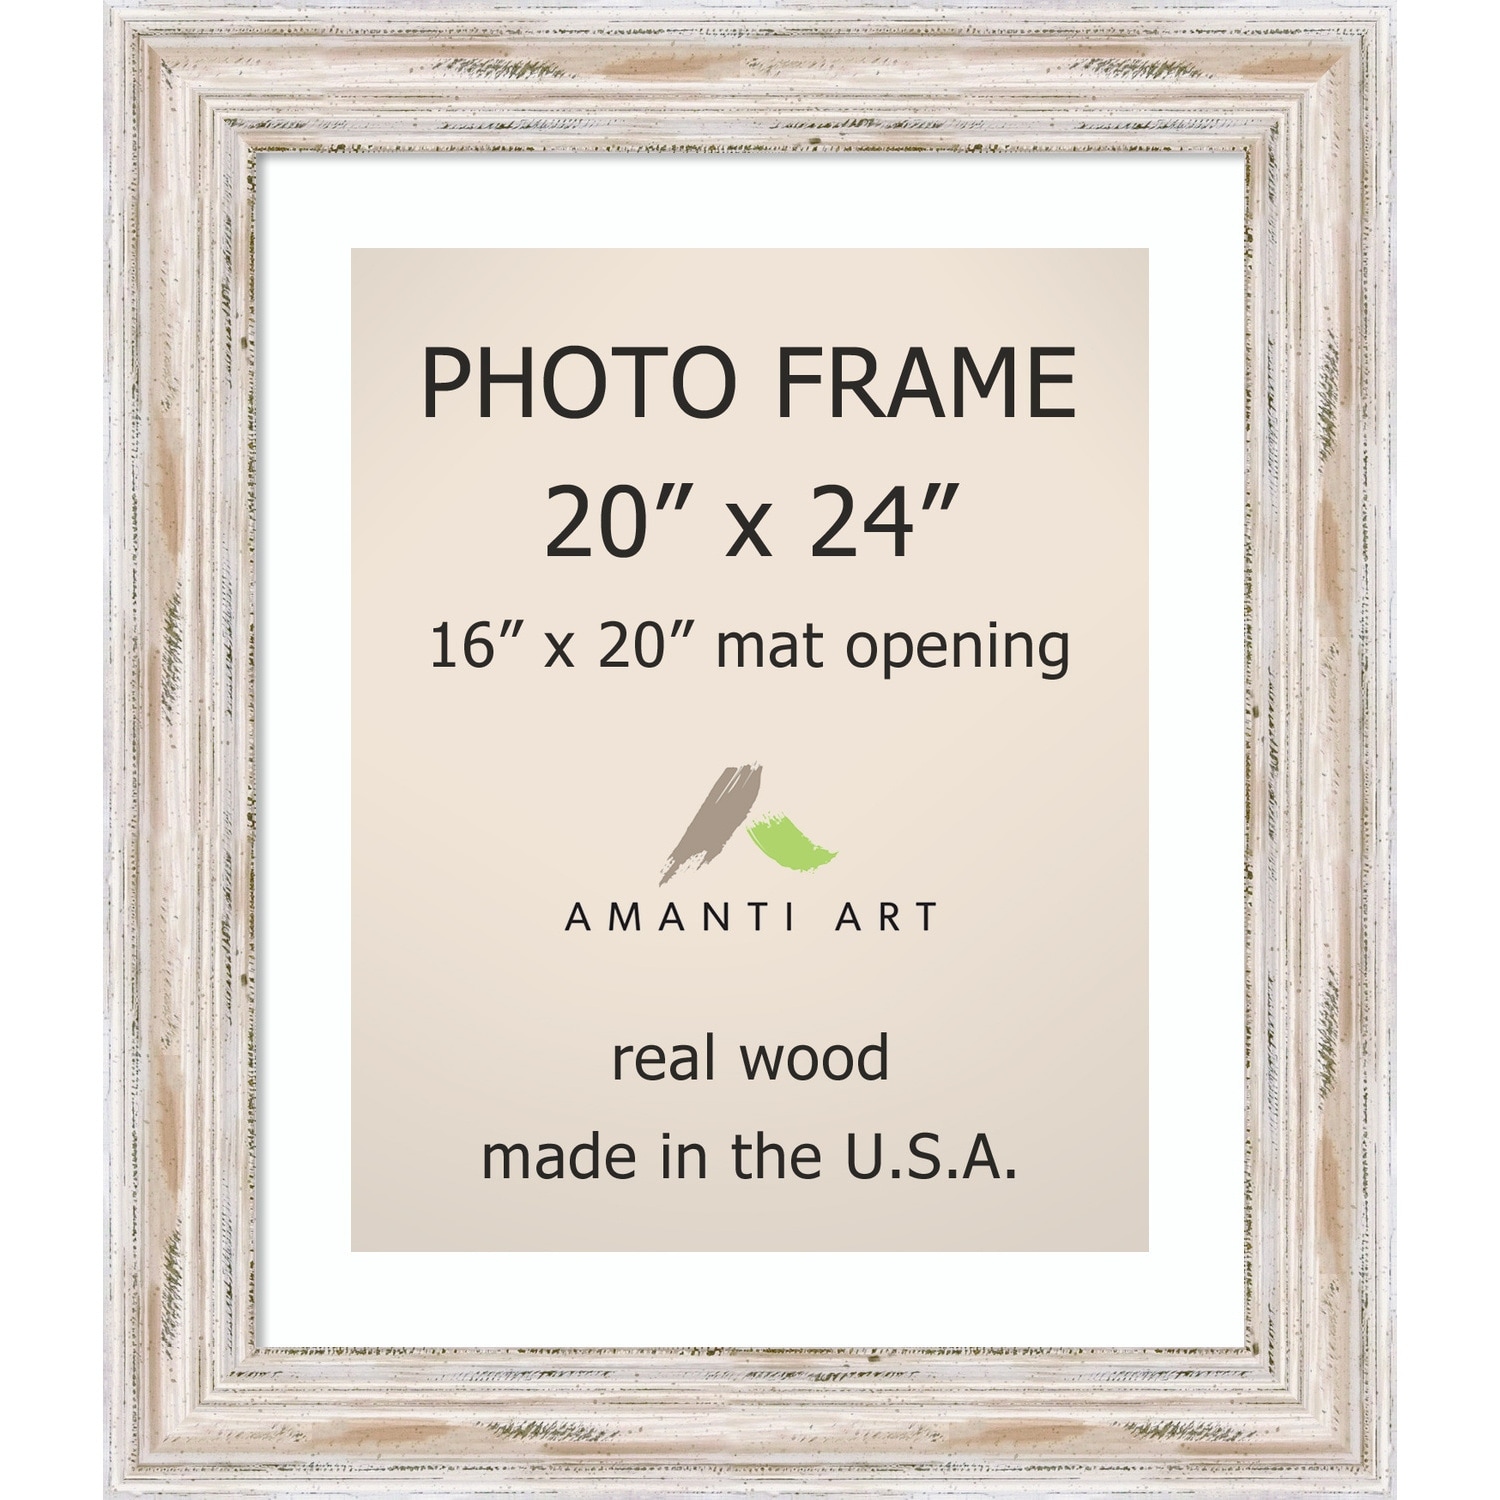 Barnwood Picture Frame With White Mat, 8X10 11X14 16X20 Mats Thin